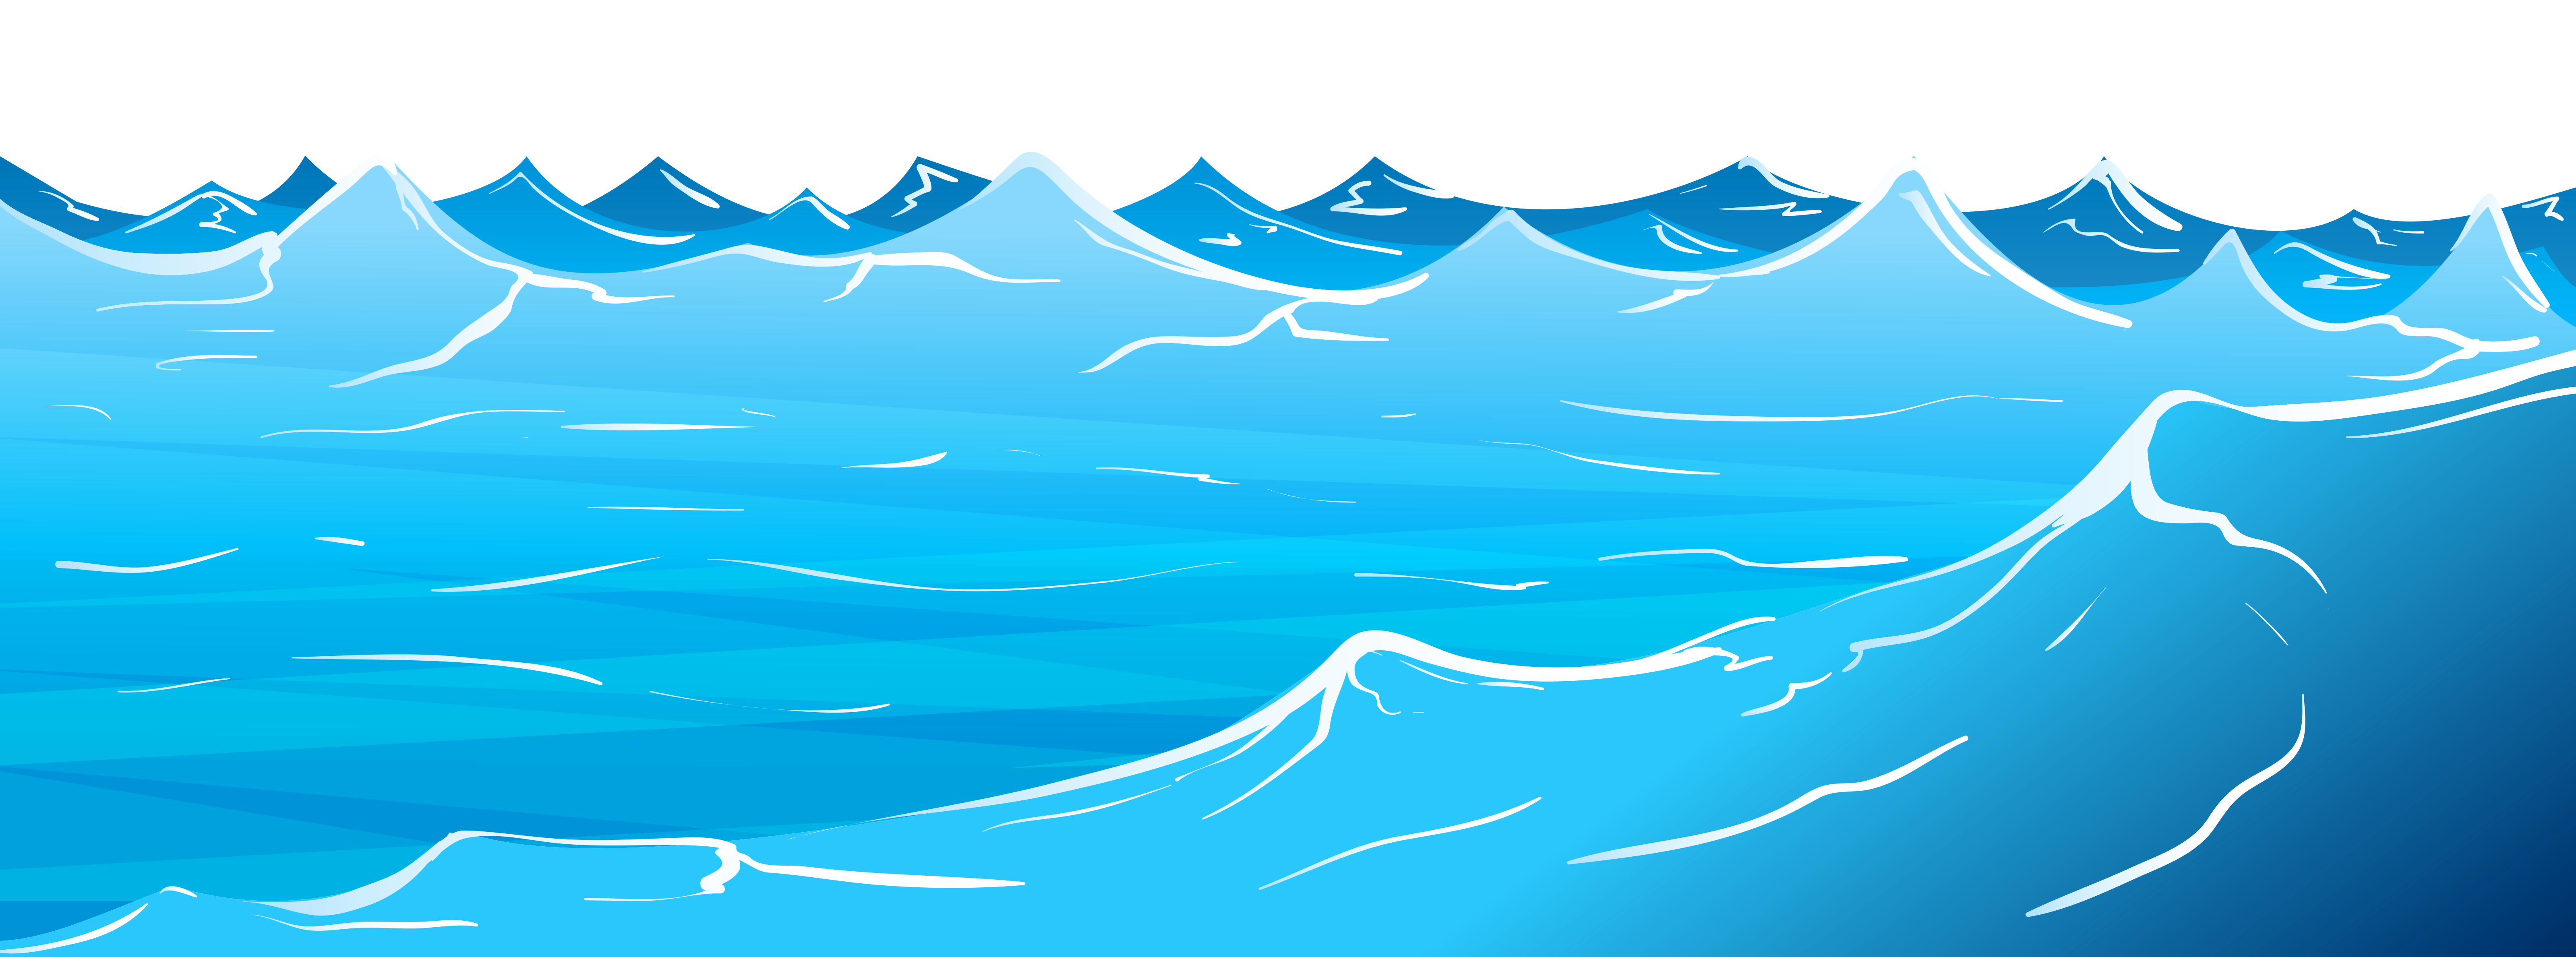 Ocean cartoon clipart images gallery for free download.